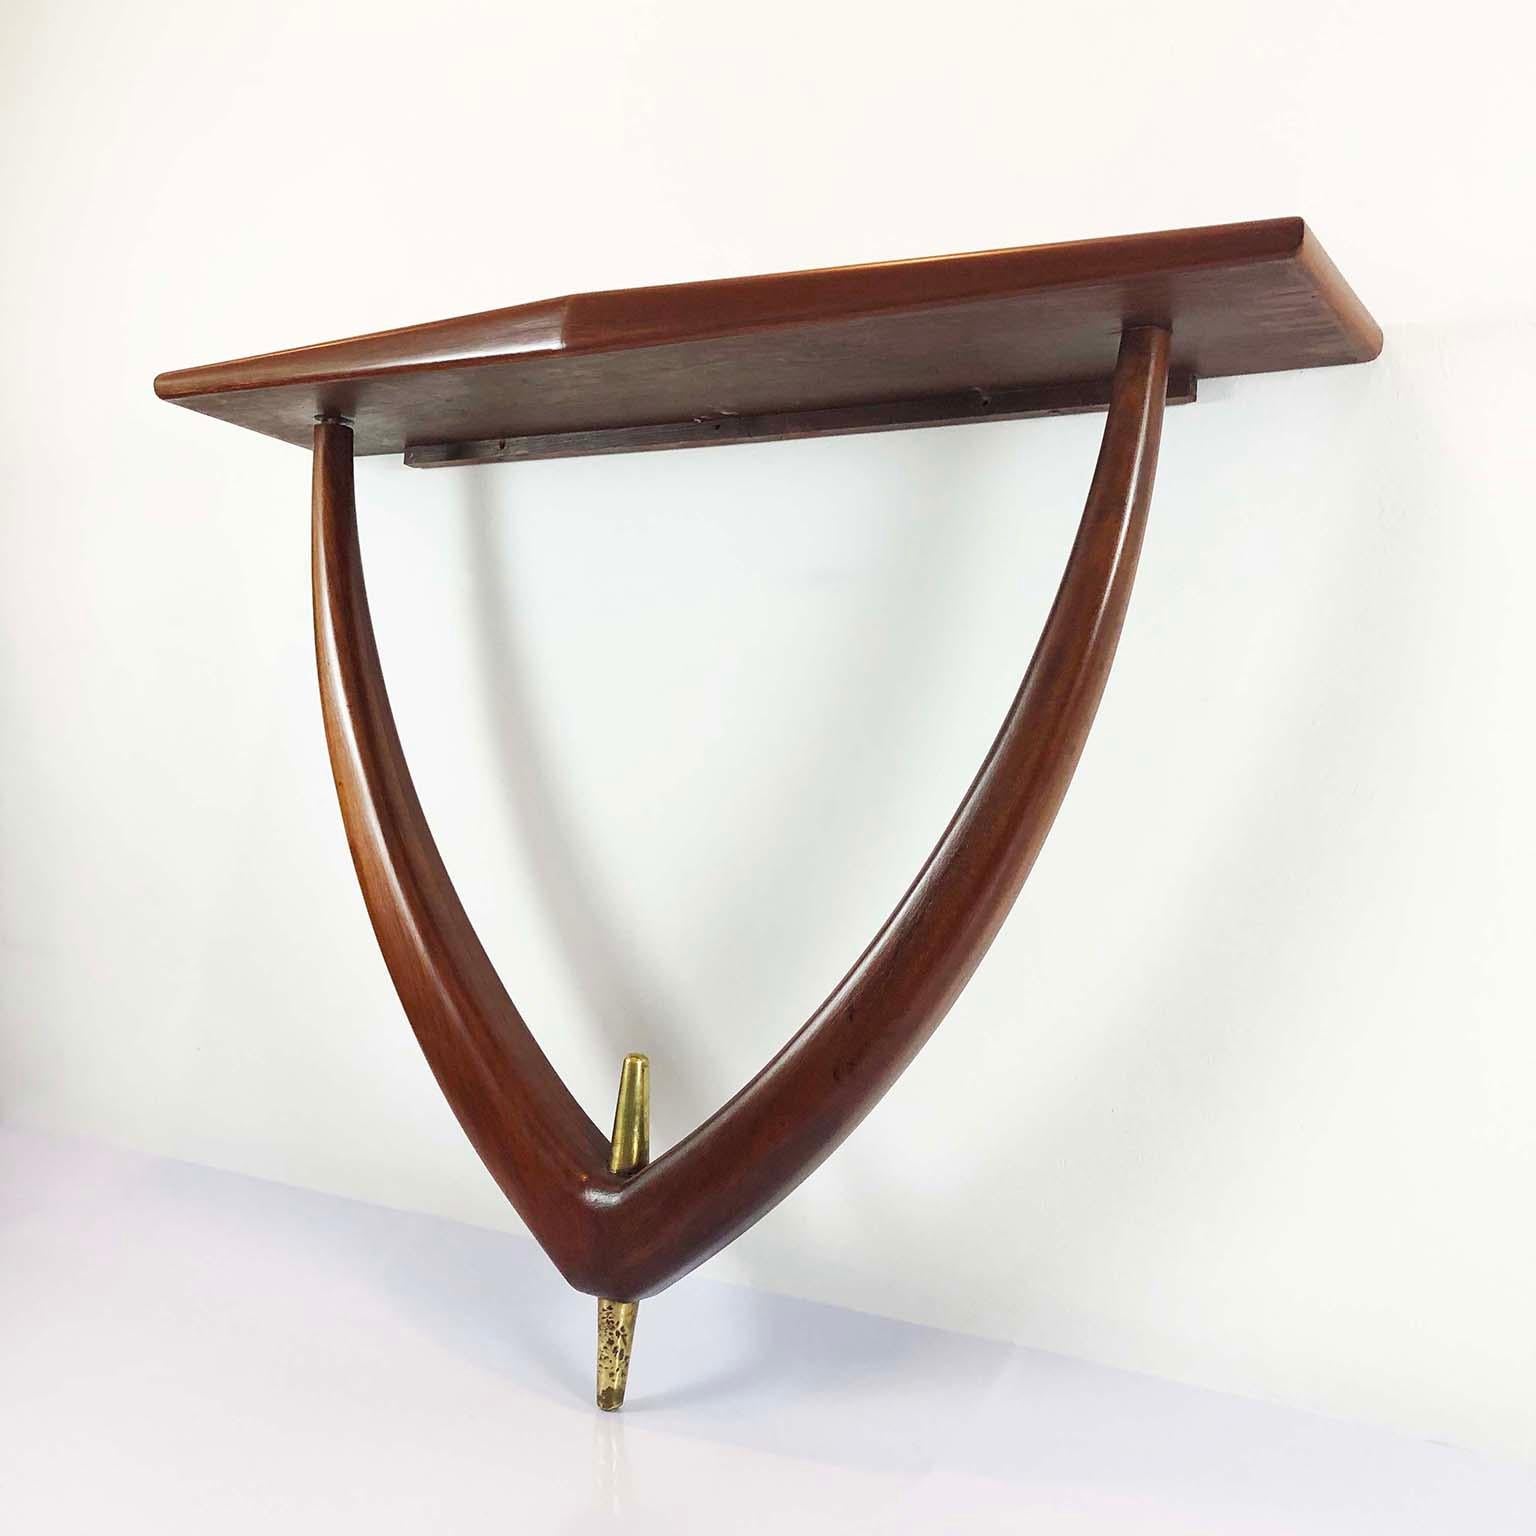 We offer this beautiful curvy shaped wall-mounted console in a fantastic mahogany wood. Narrow proportions and nice size for a small entry or hallway, circa 1960.